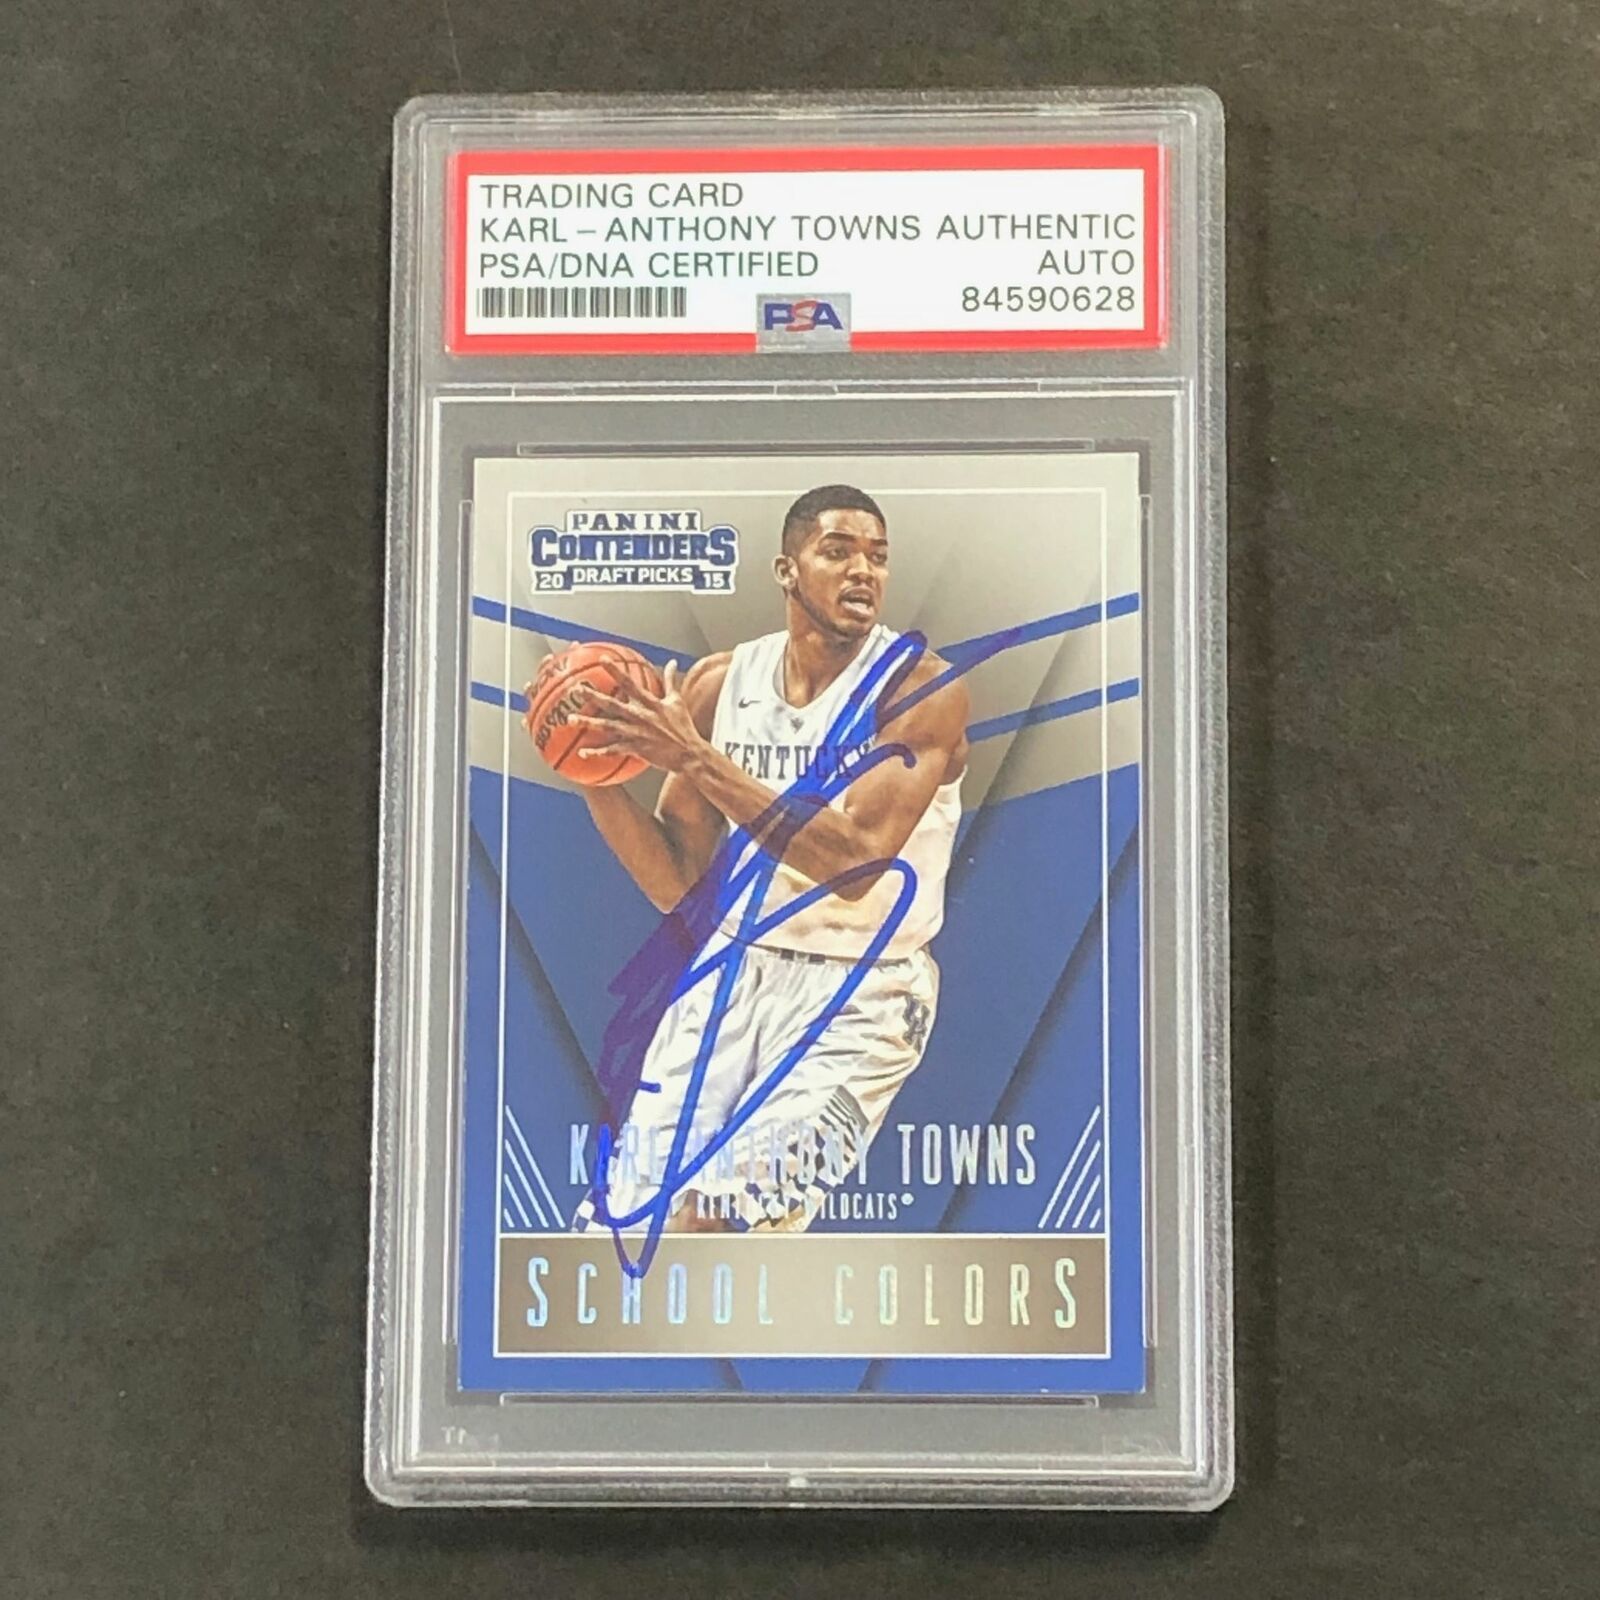 Primary image for 2015-16 Contenders Draft Pick #24 Karl-Anthony Towns Signed Card AUTO PSA Slabbe